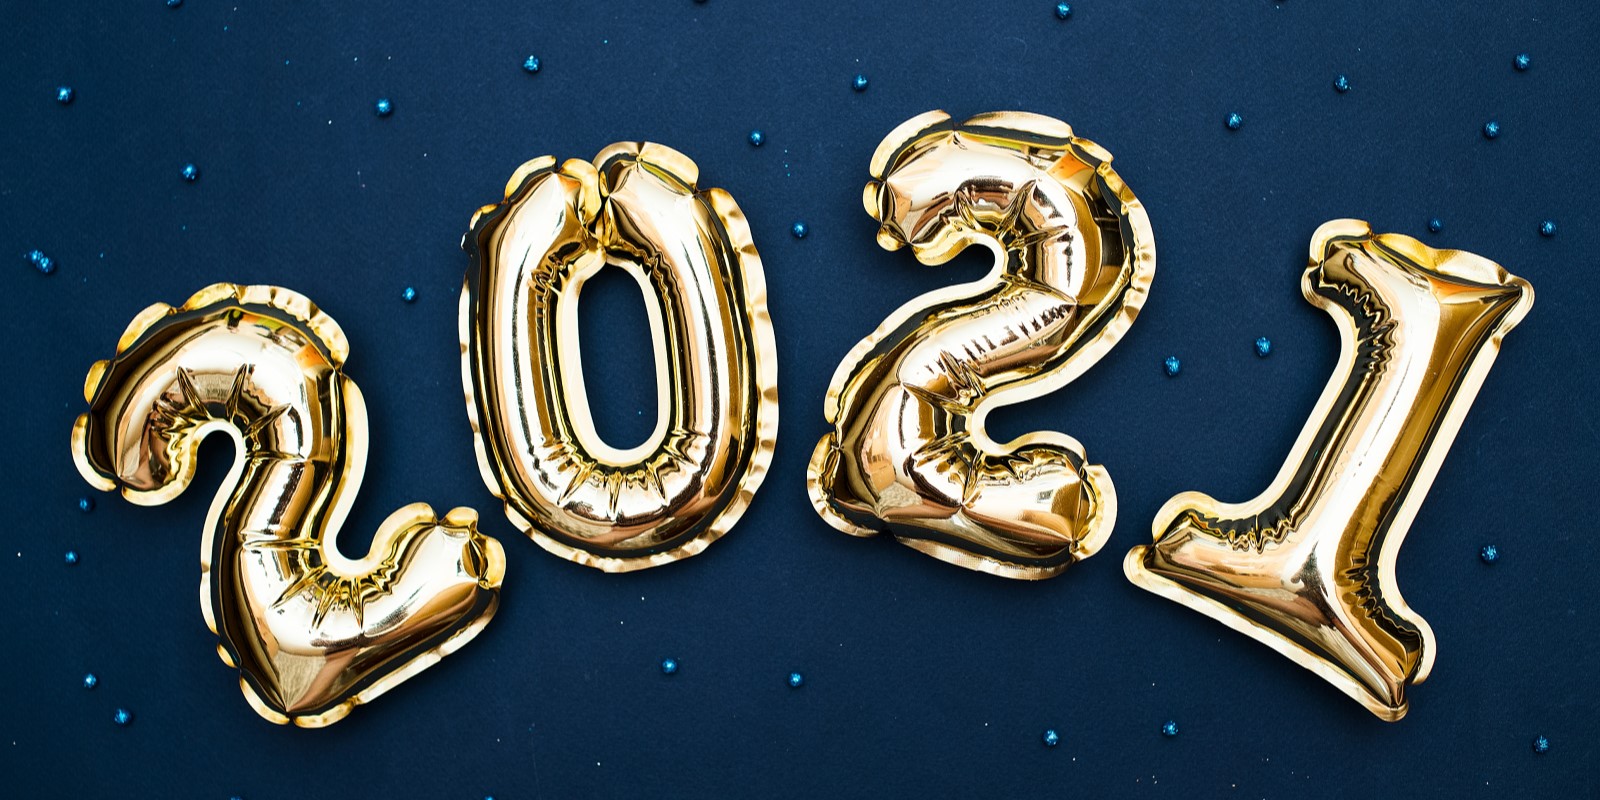 2021 Golden numbers 2021 from new year's balls of yellow metallic color on a blue